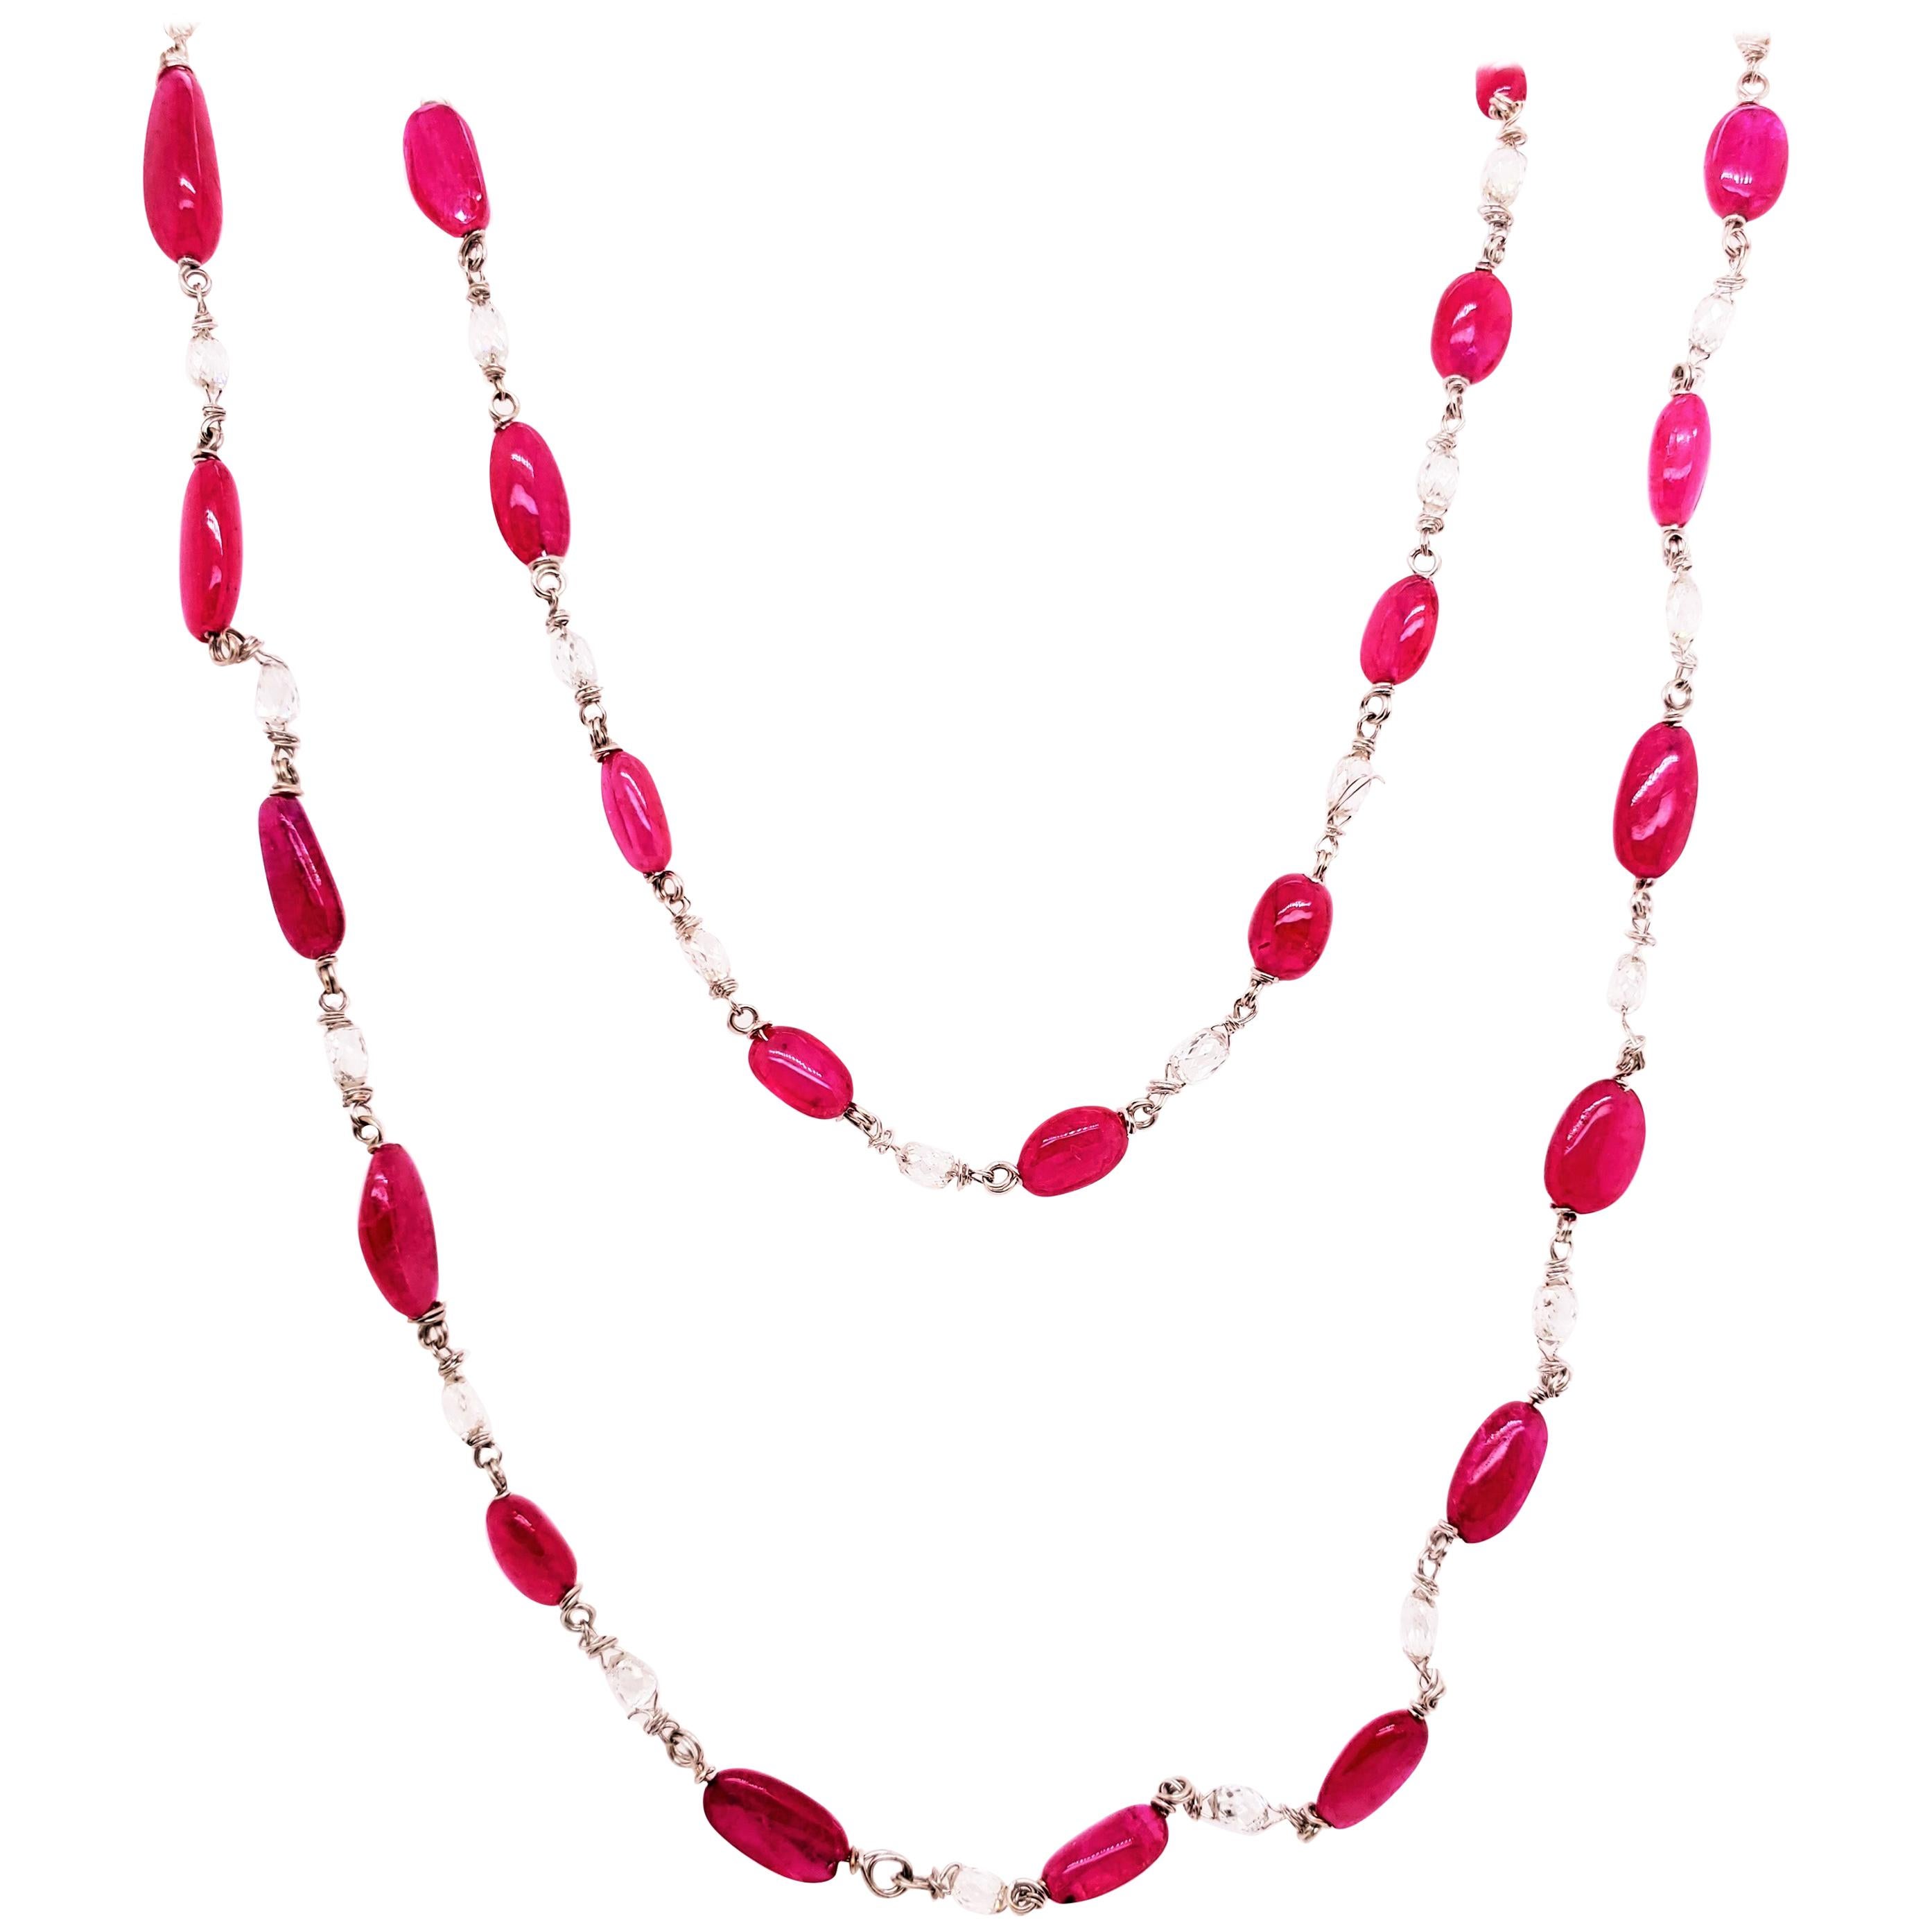 Vivid Red Ruby Beads and Diamond Briolette White Gold Necklace (Collier en or blanc)